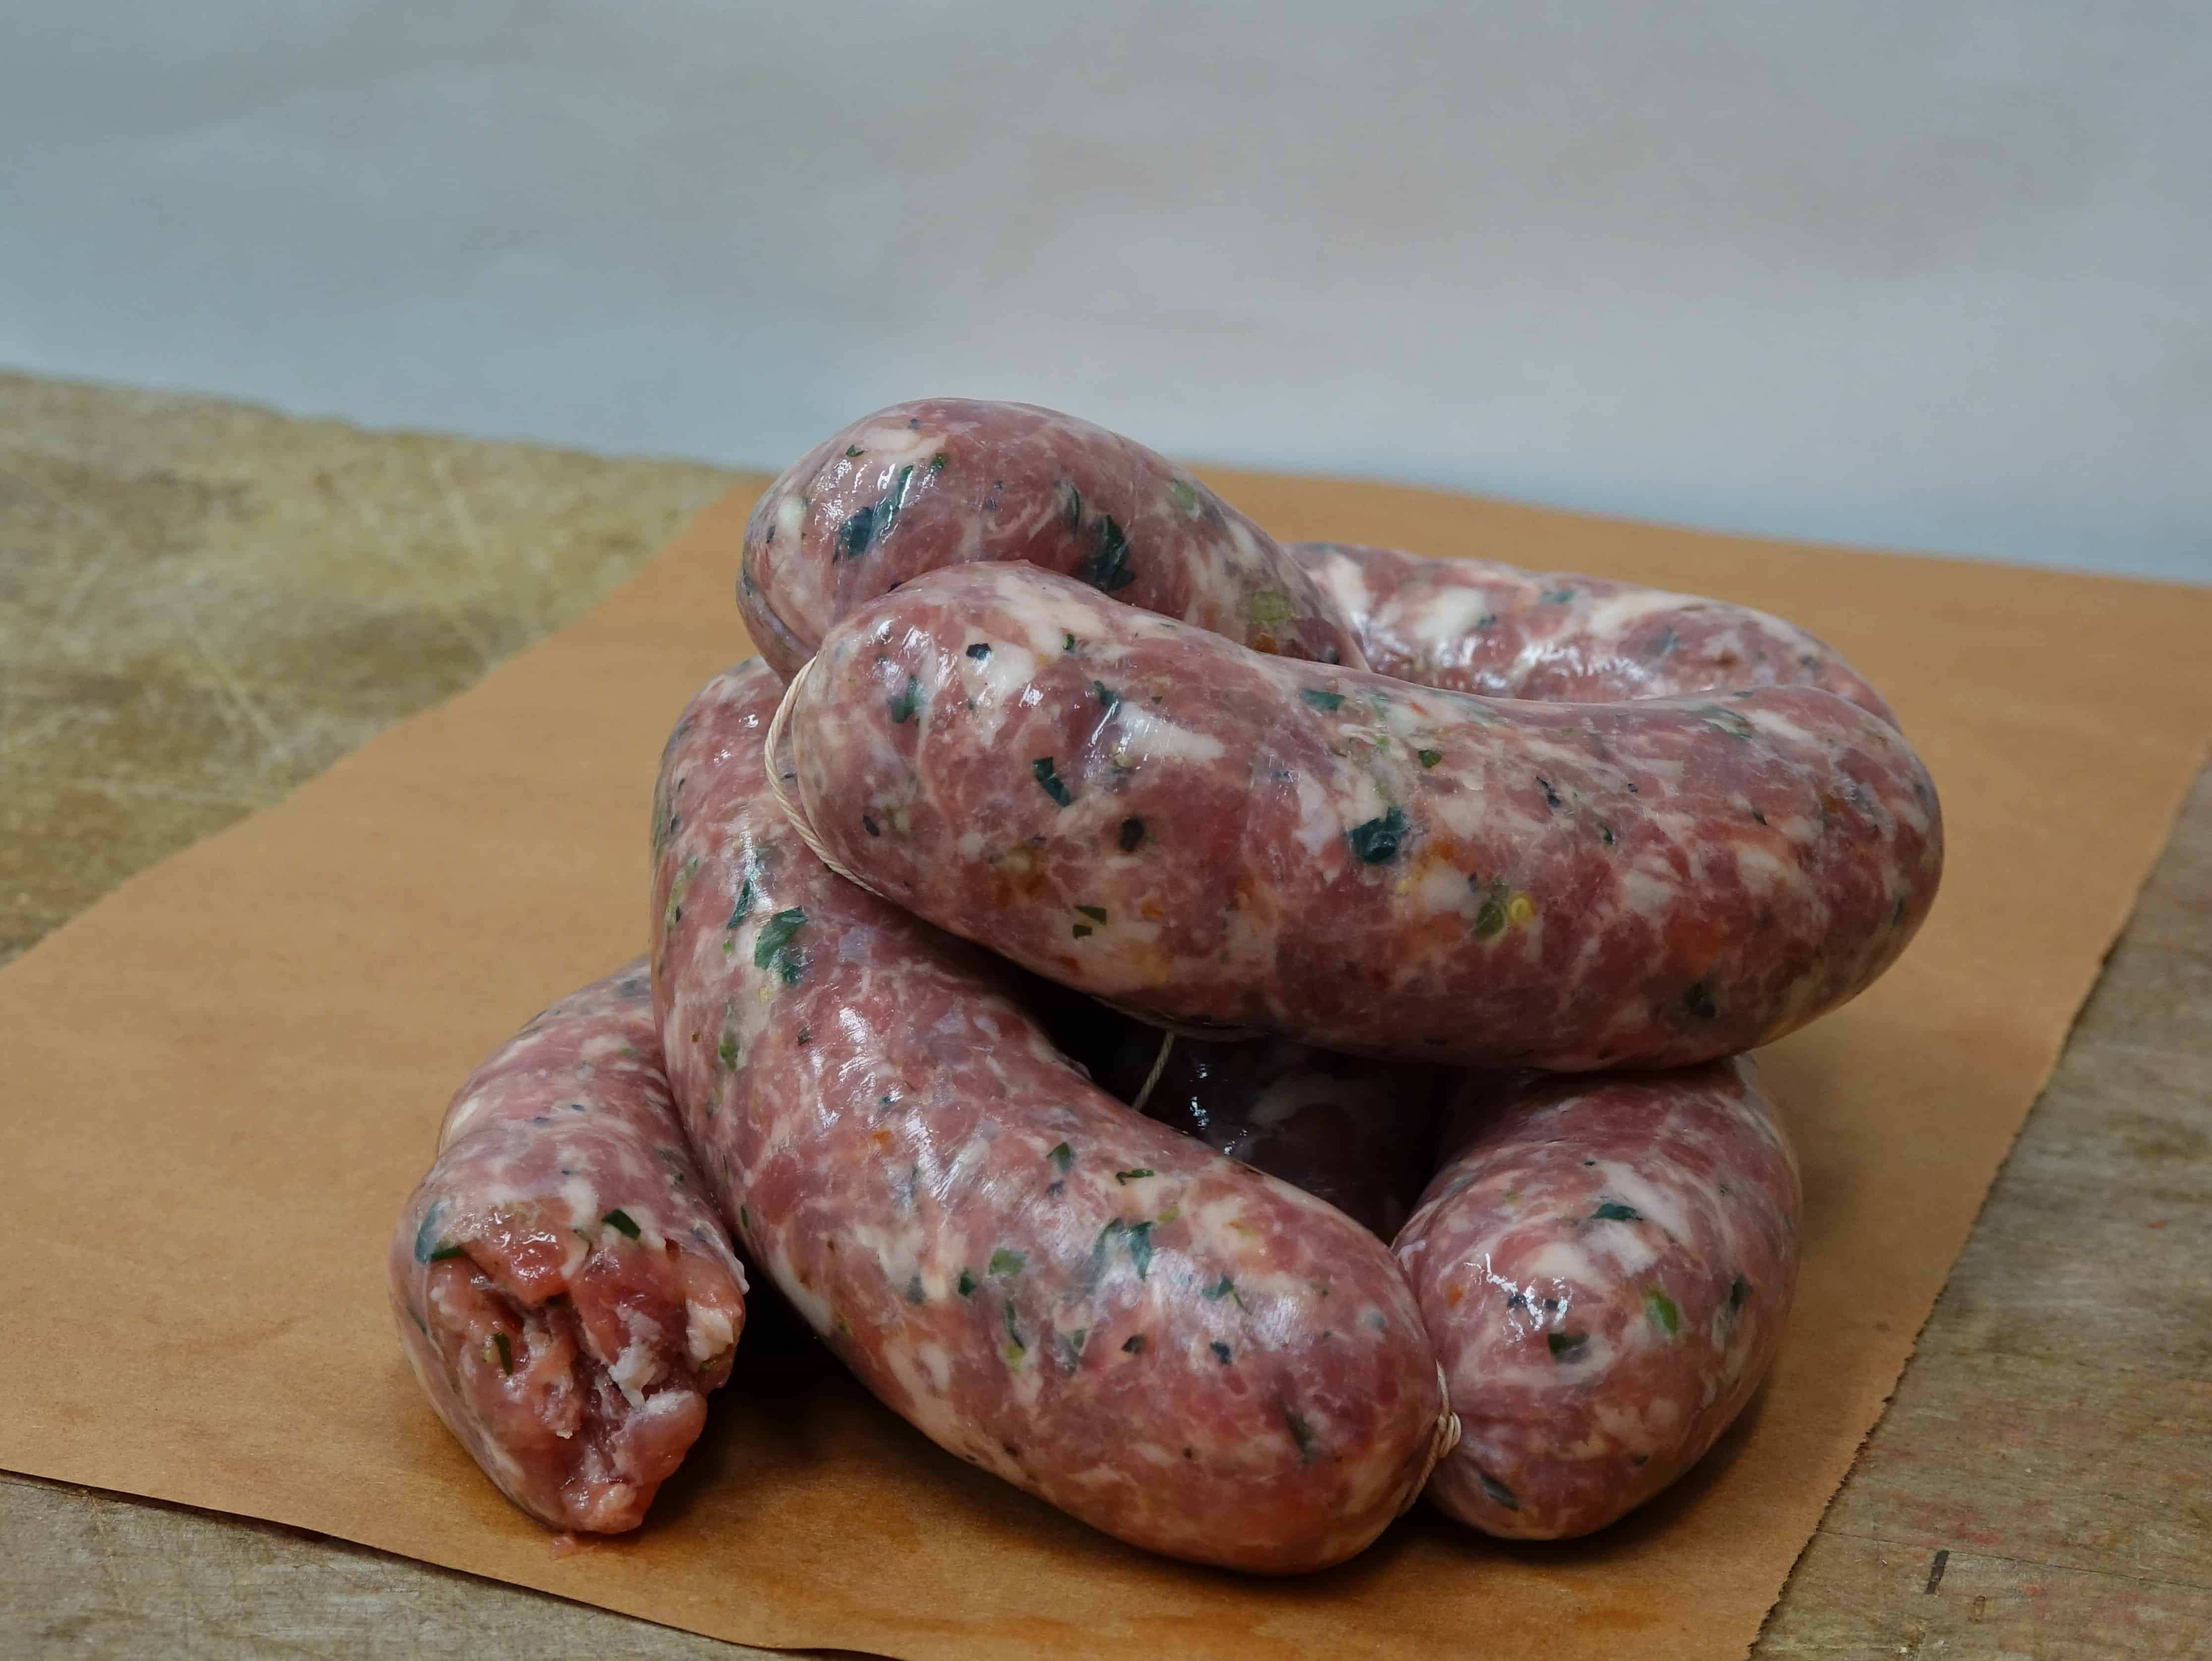 Vincent's Broccoli Rabe Sausage - Thick 1lb Pack/4 Links